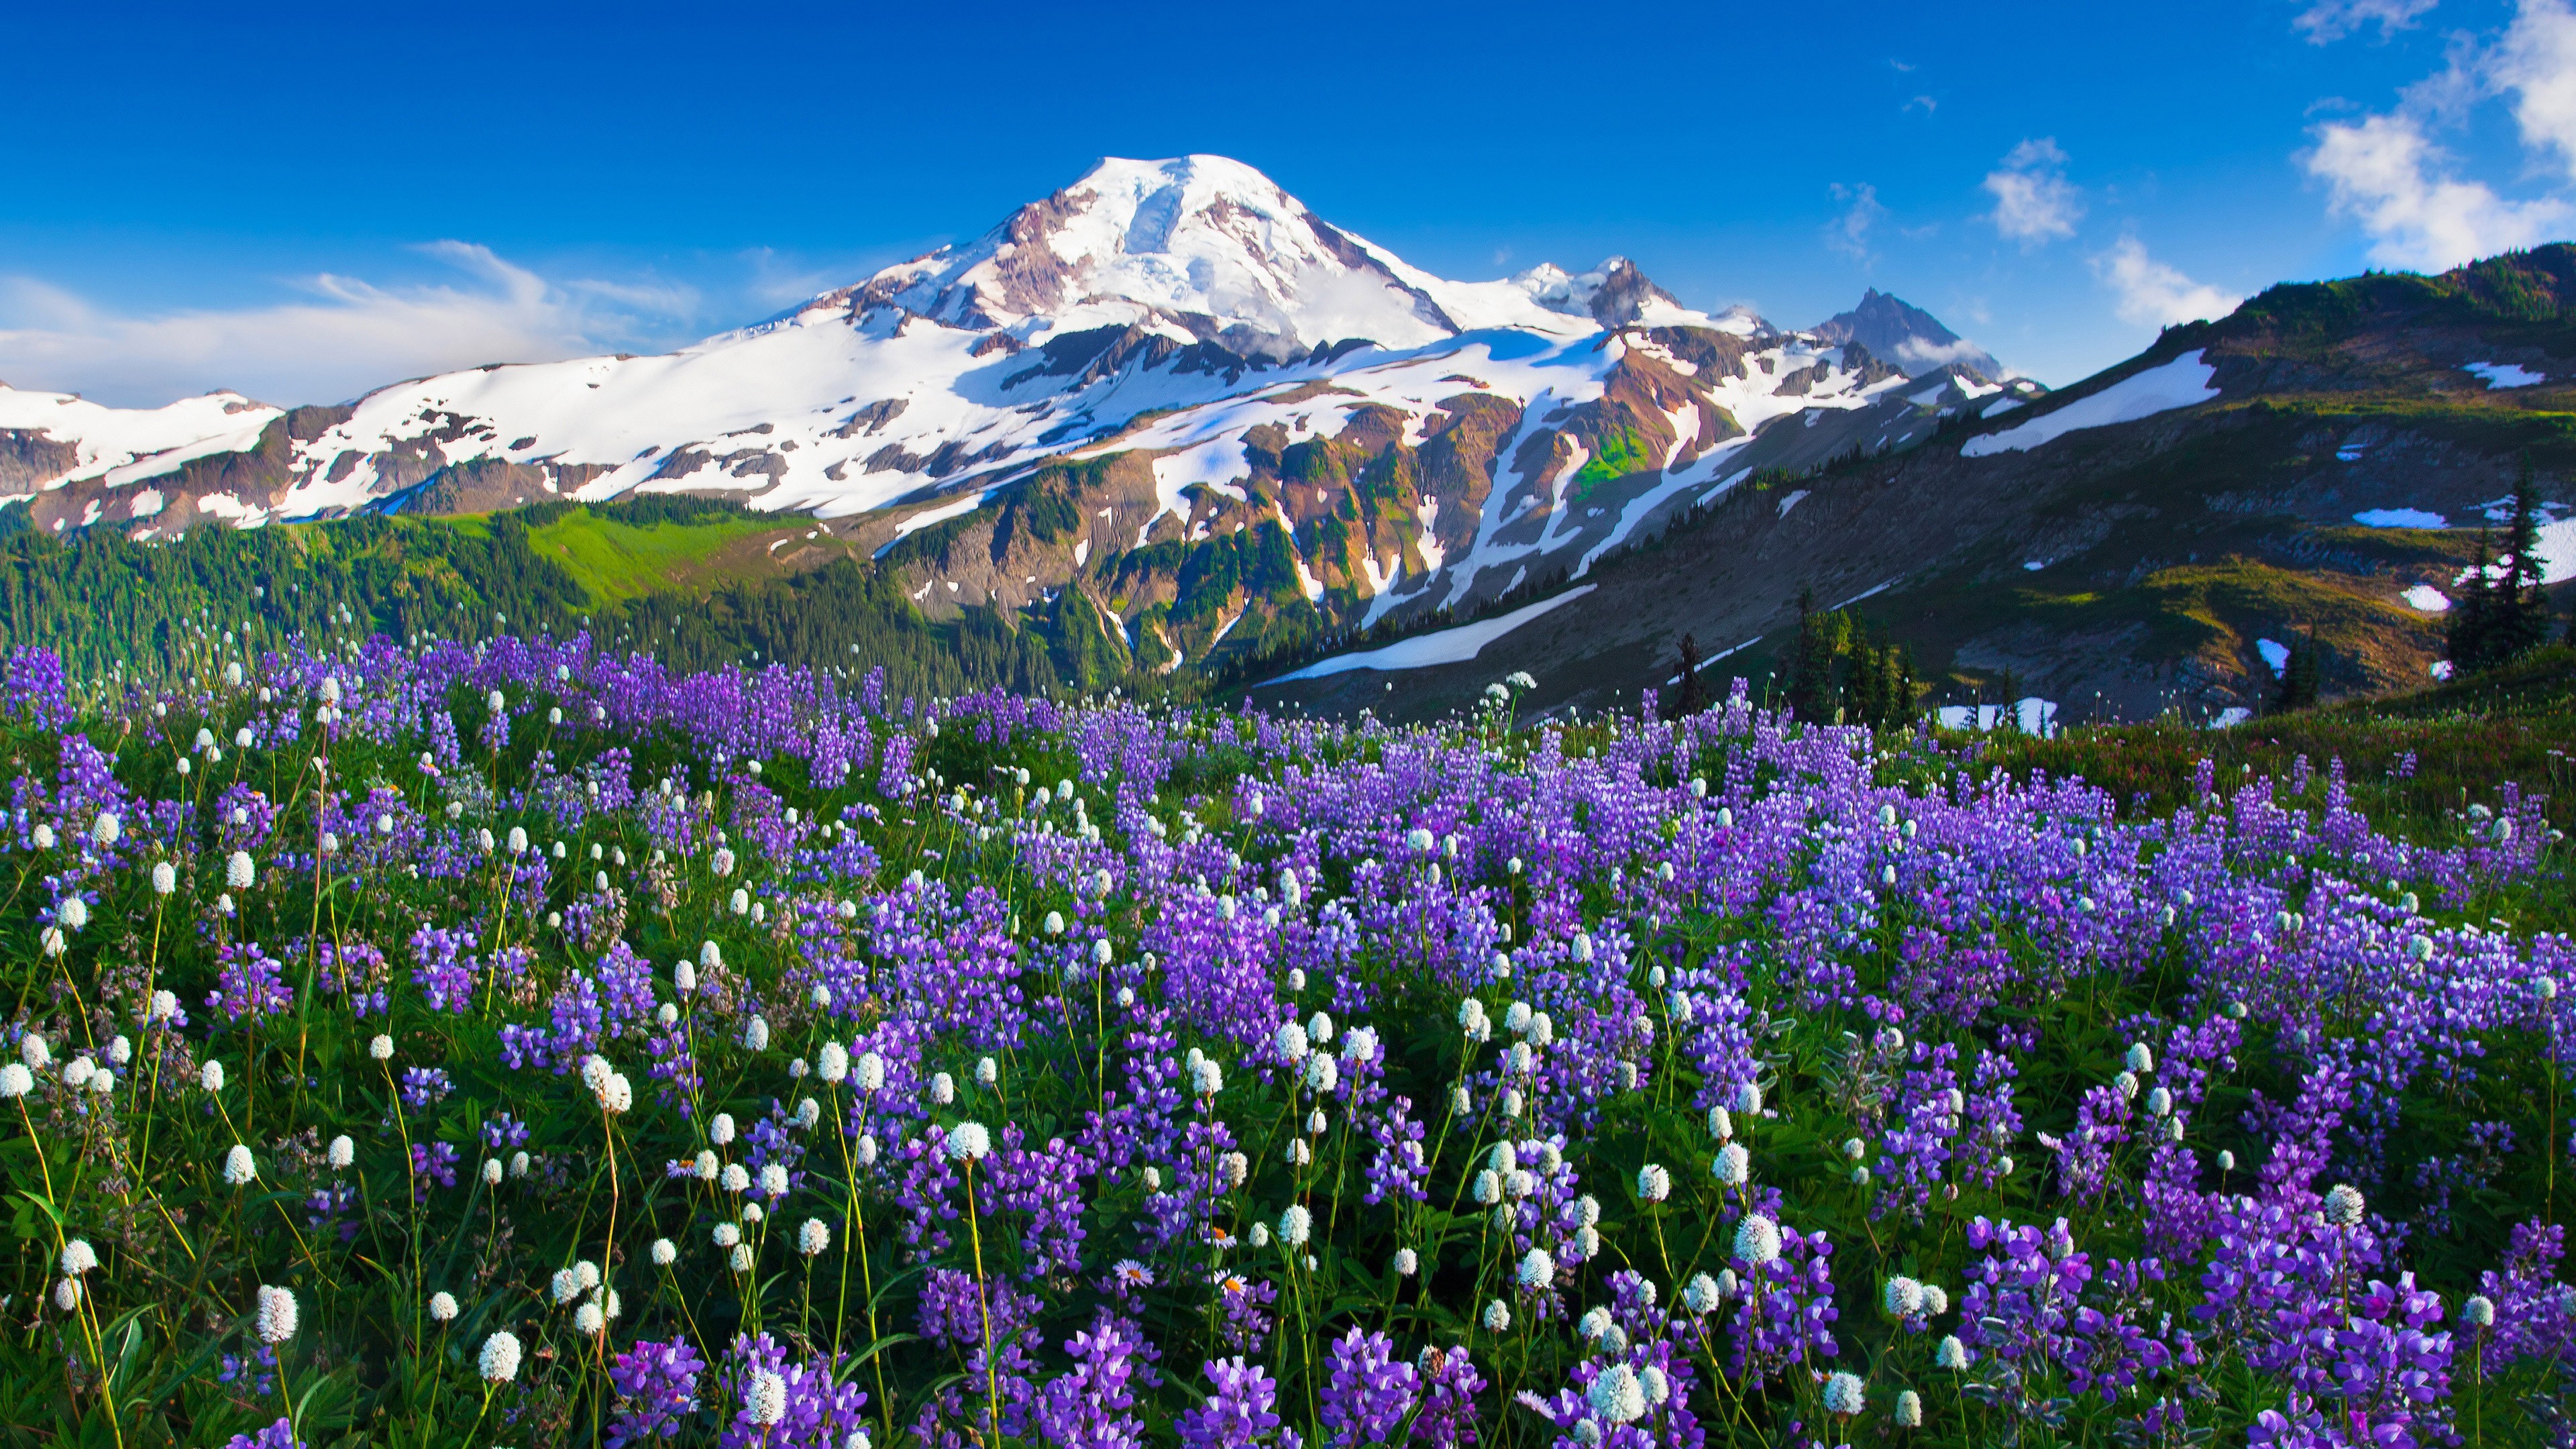 Mountains Flowers Landscape Wallpapers Hd Desktop And Mobile